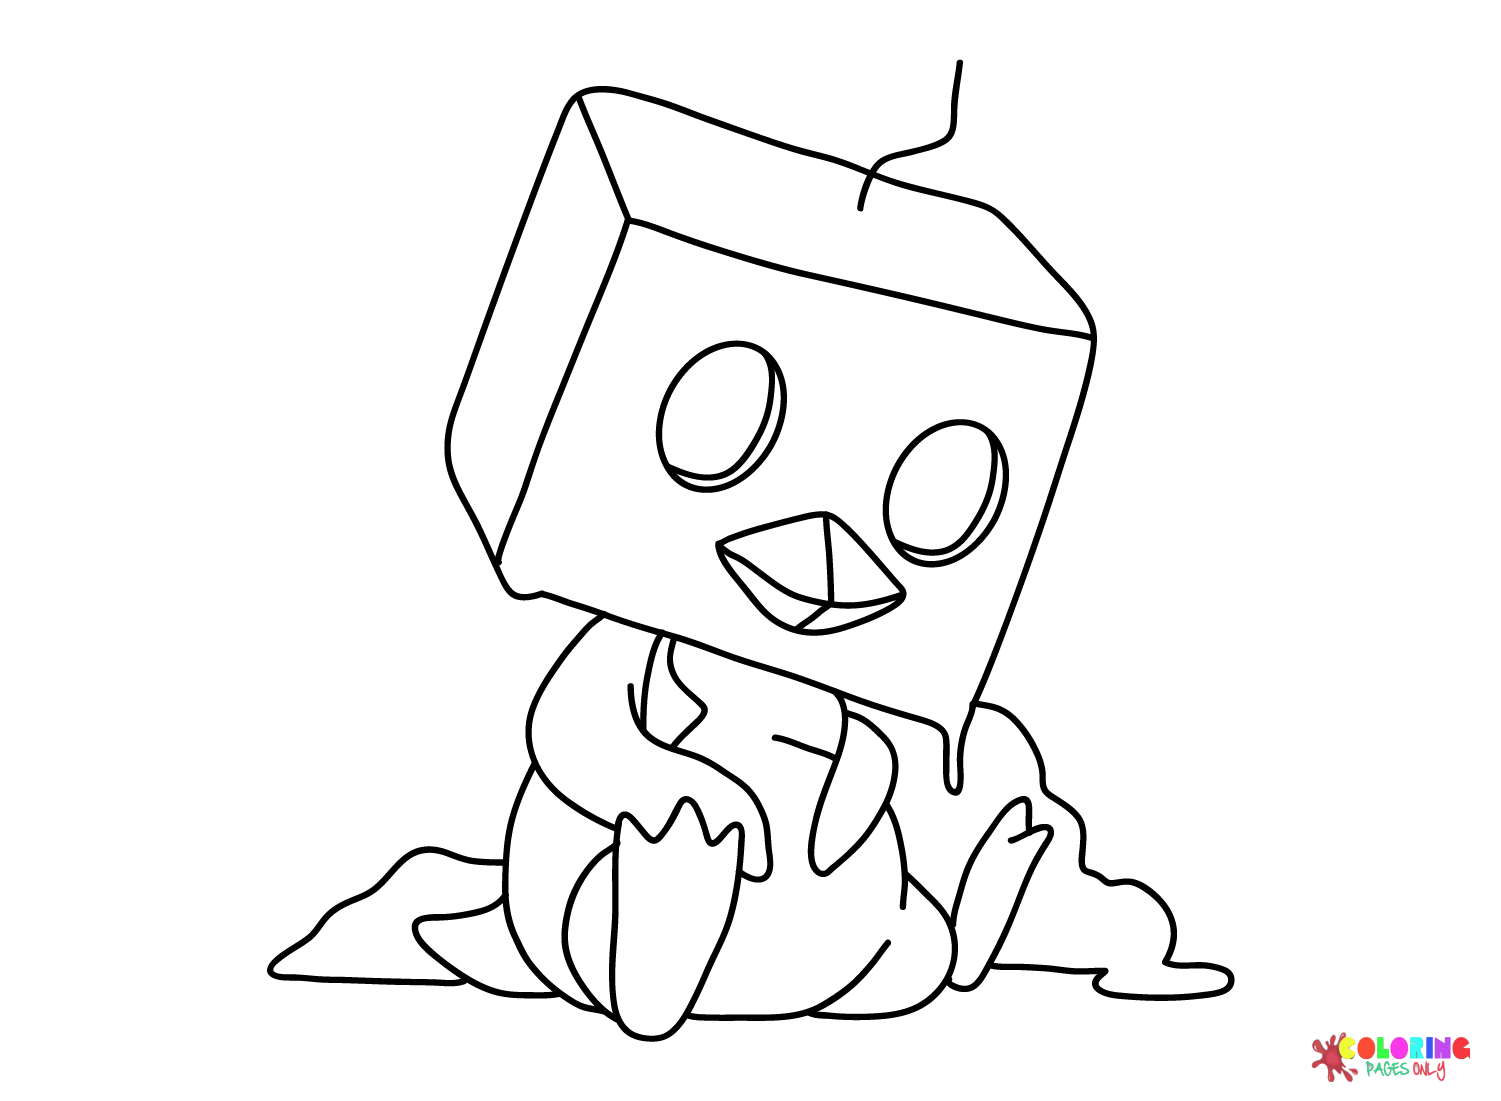 Eiscue Sad Coloring Page